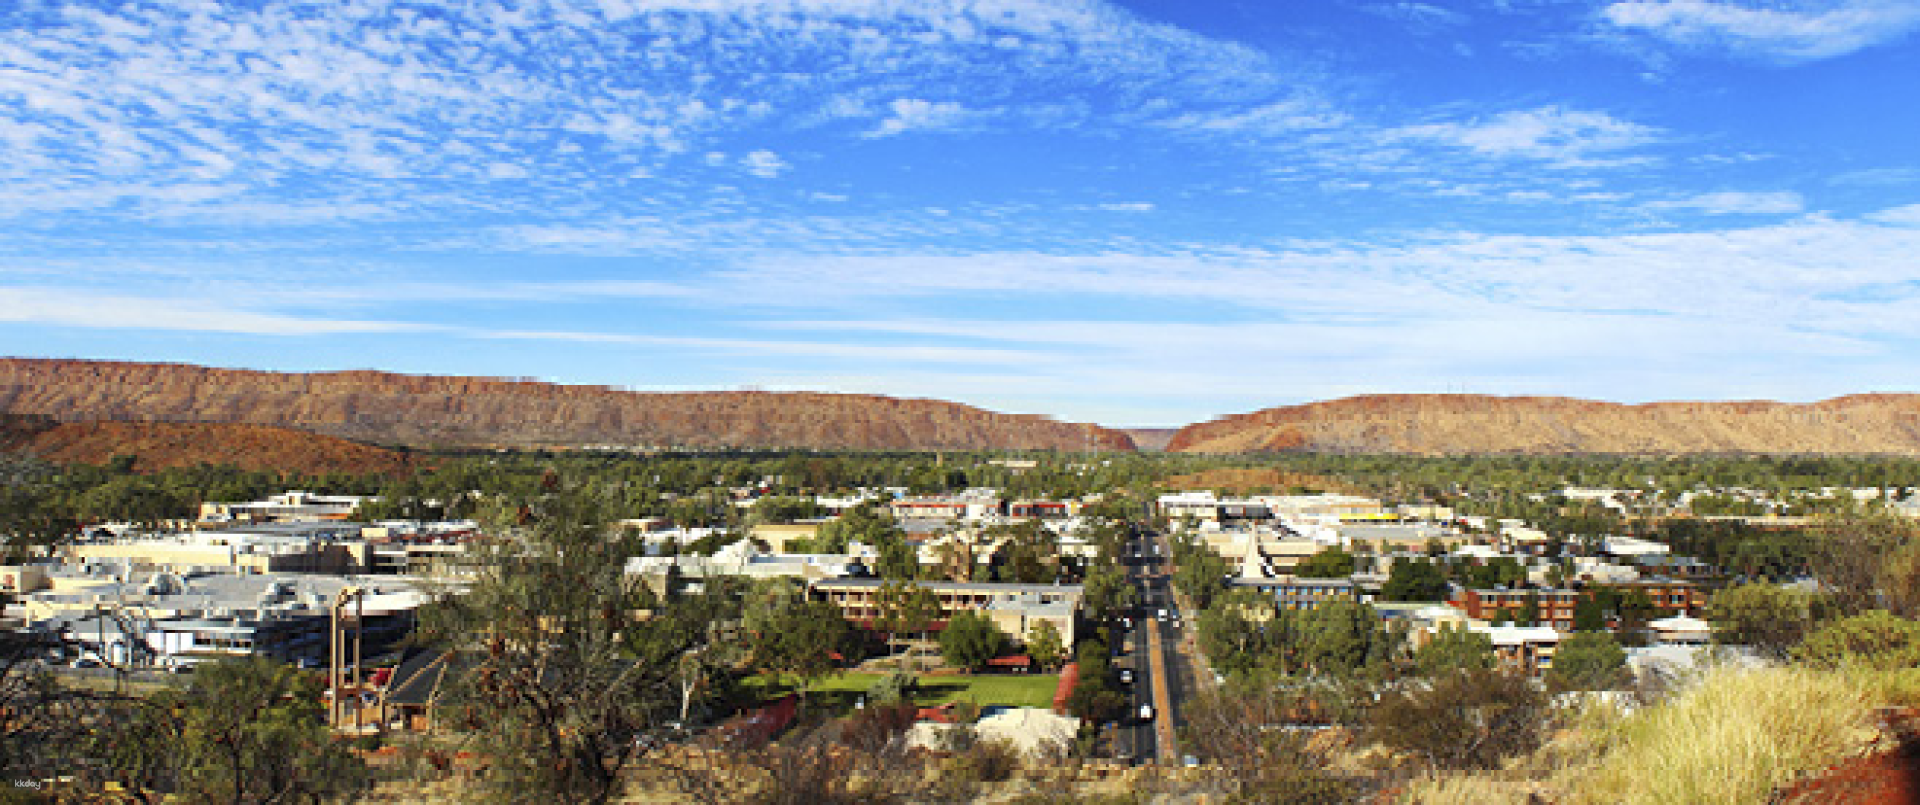 Ayers Rock Resort to Alice Springs Transfer | Northern Territory